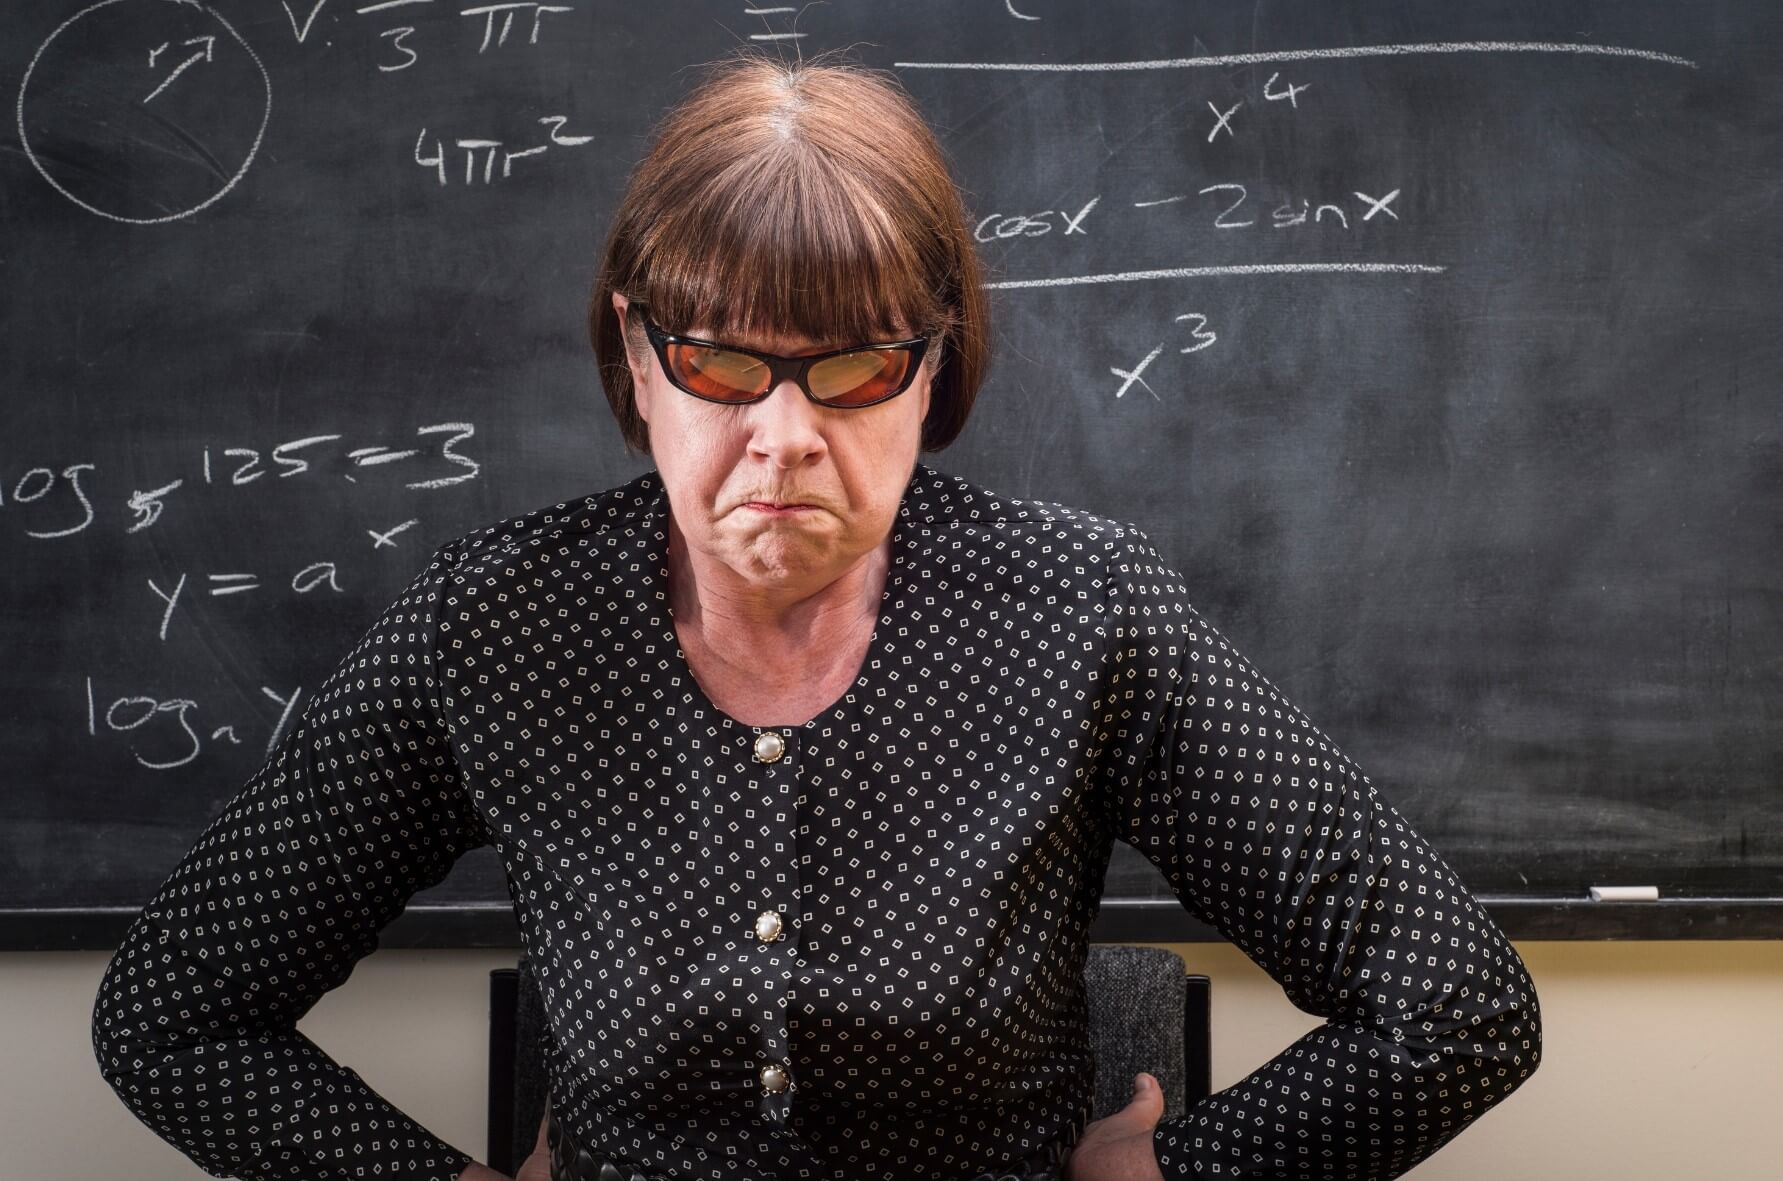 An angry veteran teacher in front of a blackboard demonstrates to a new class the tone they can expect for the school year.